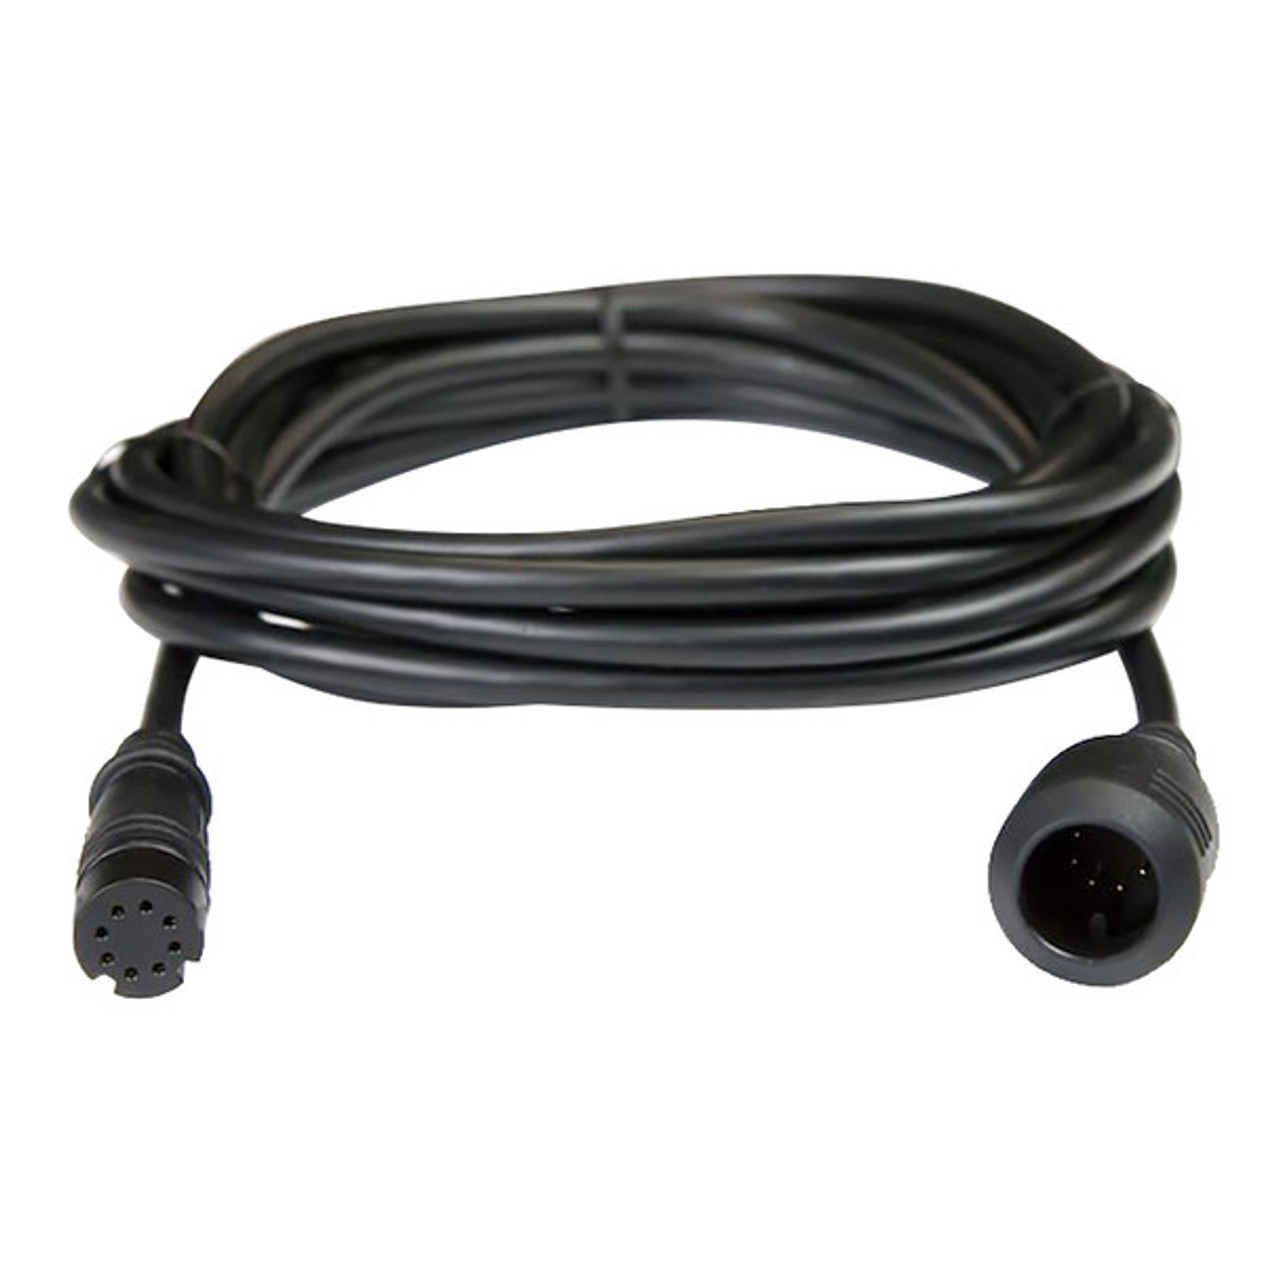 Lowrance 000-14413-001 Hook2 Bullet Skimmer Transducer 10 Ft Extension  Cable - Trionics